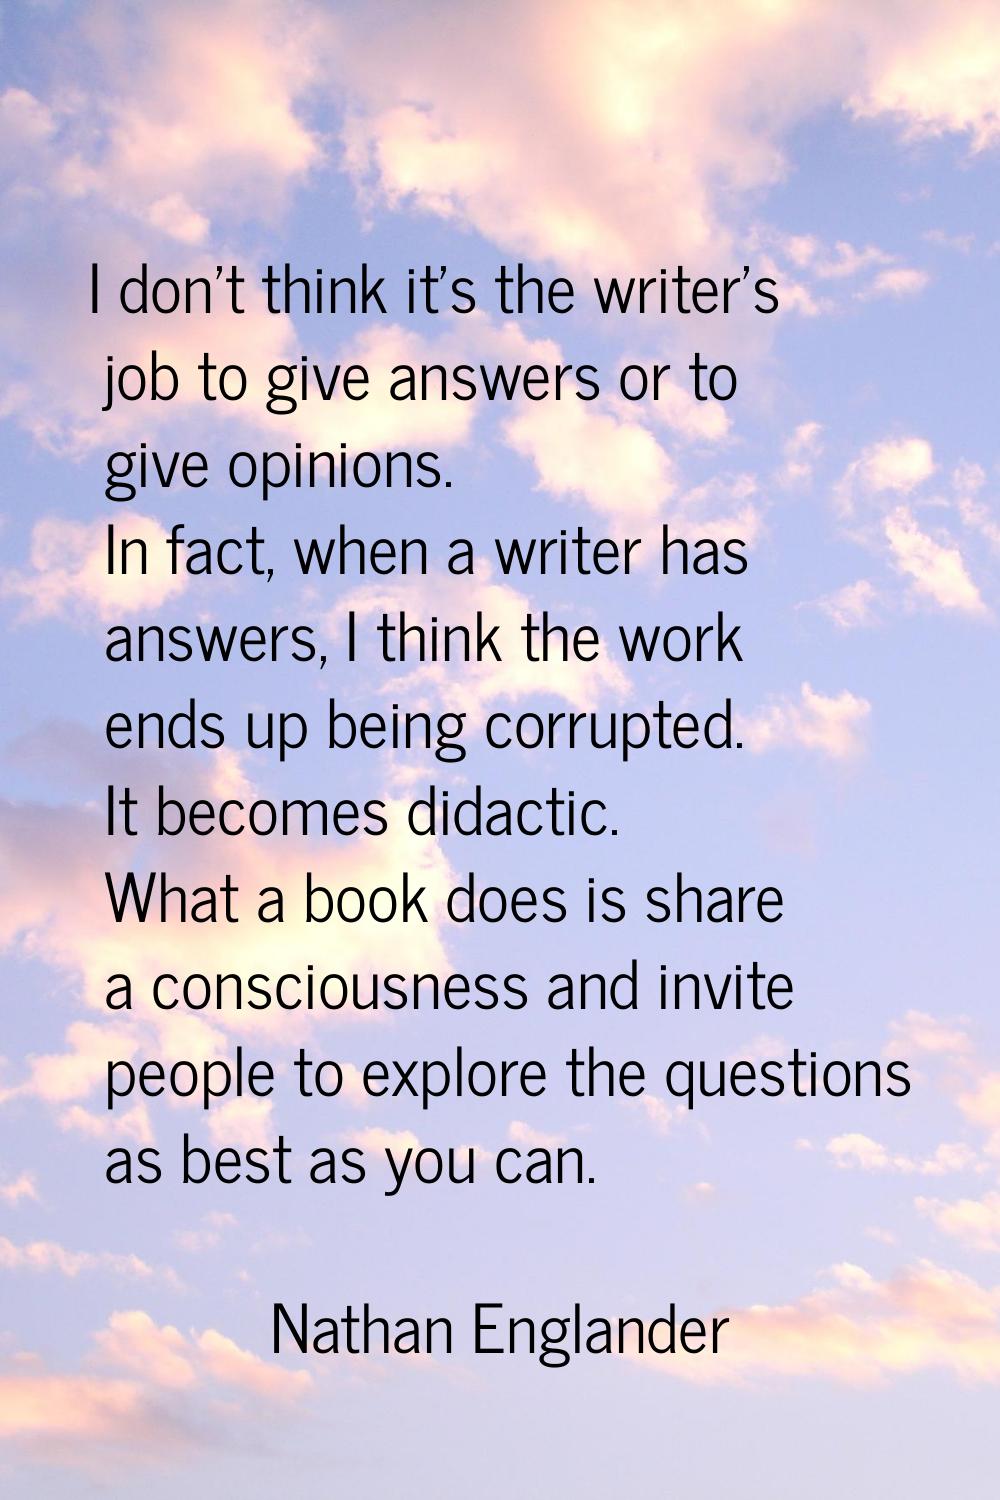 I don't think it's the writer's job to give answers or to give opinions. In fact, when a writer has